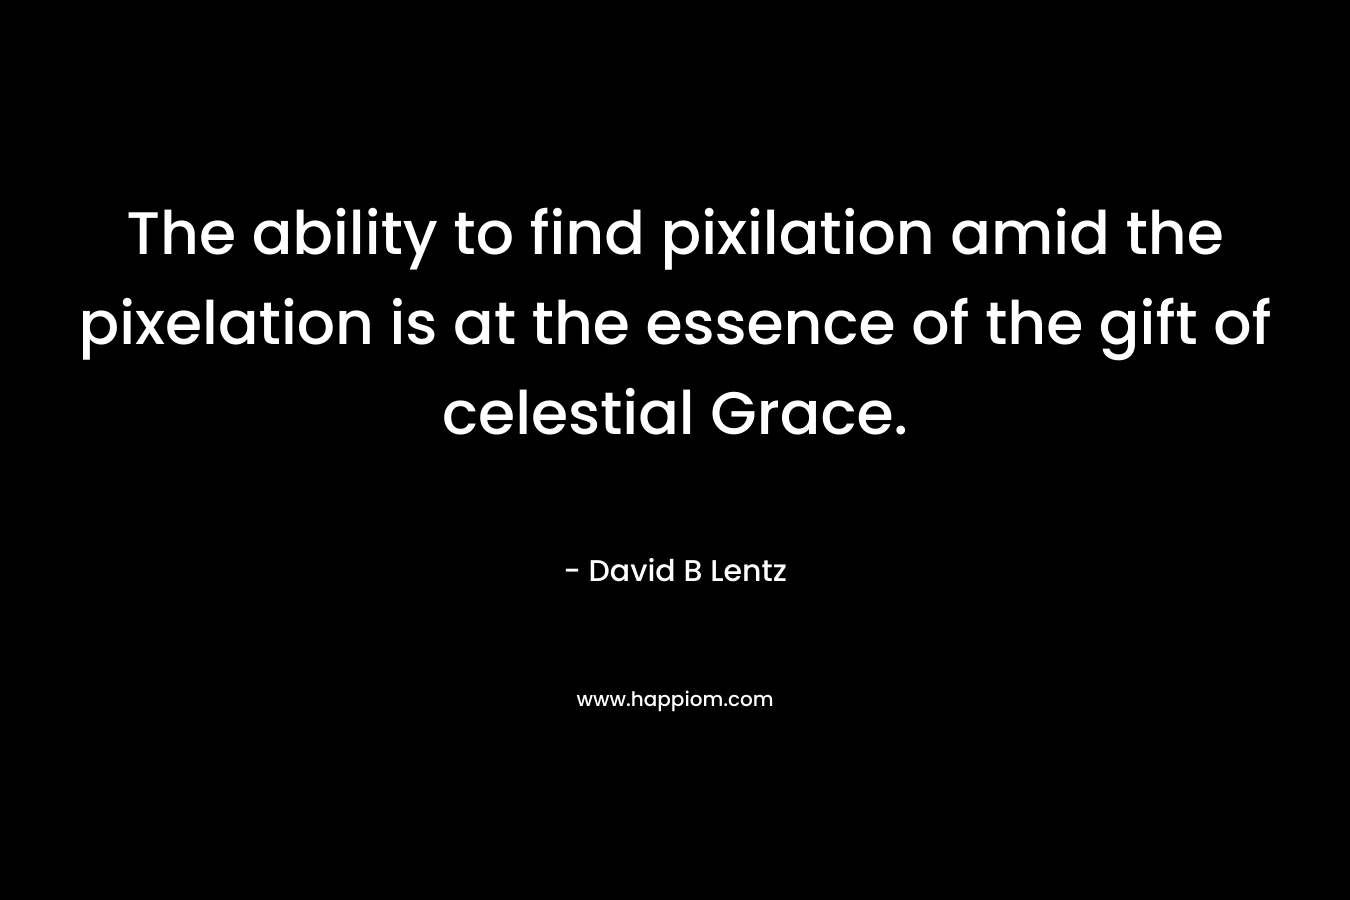 The ability to find pixilation amid the pixelation is at the essence of the gift of celestial Grace. – David B Lentz